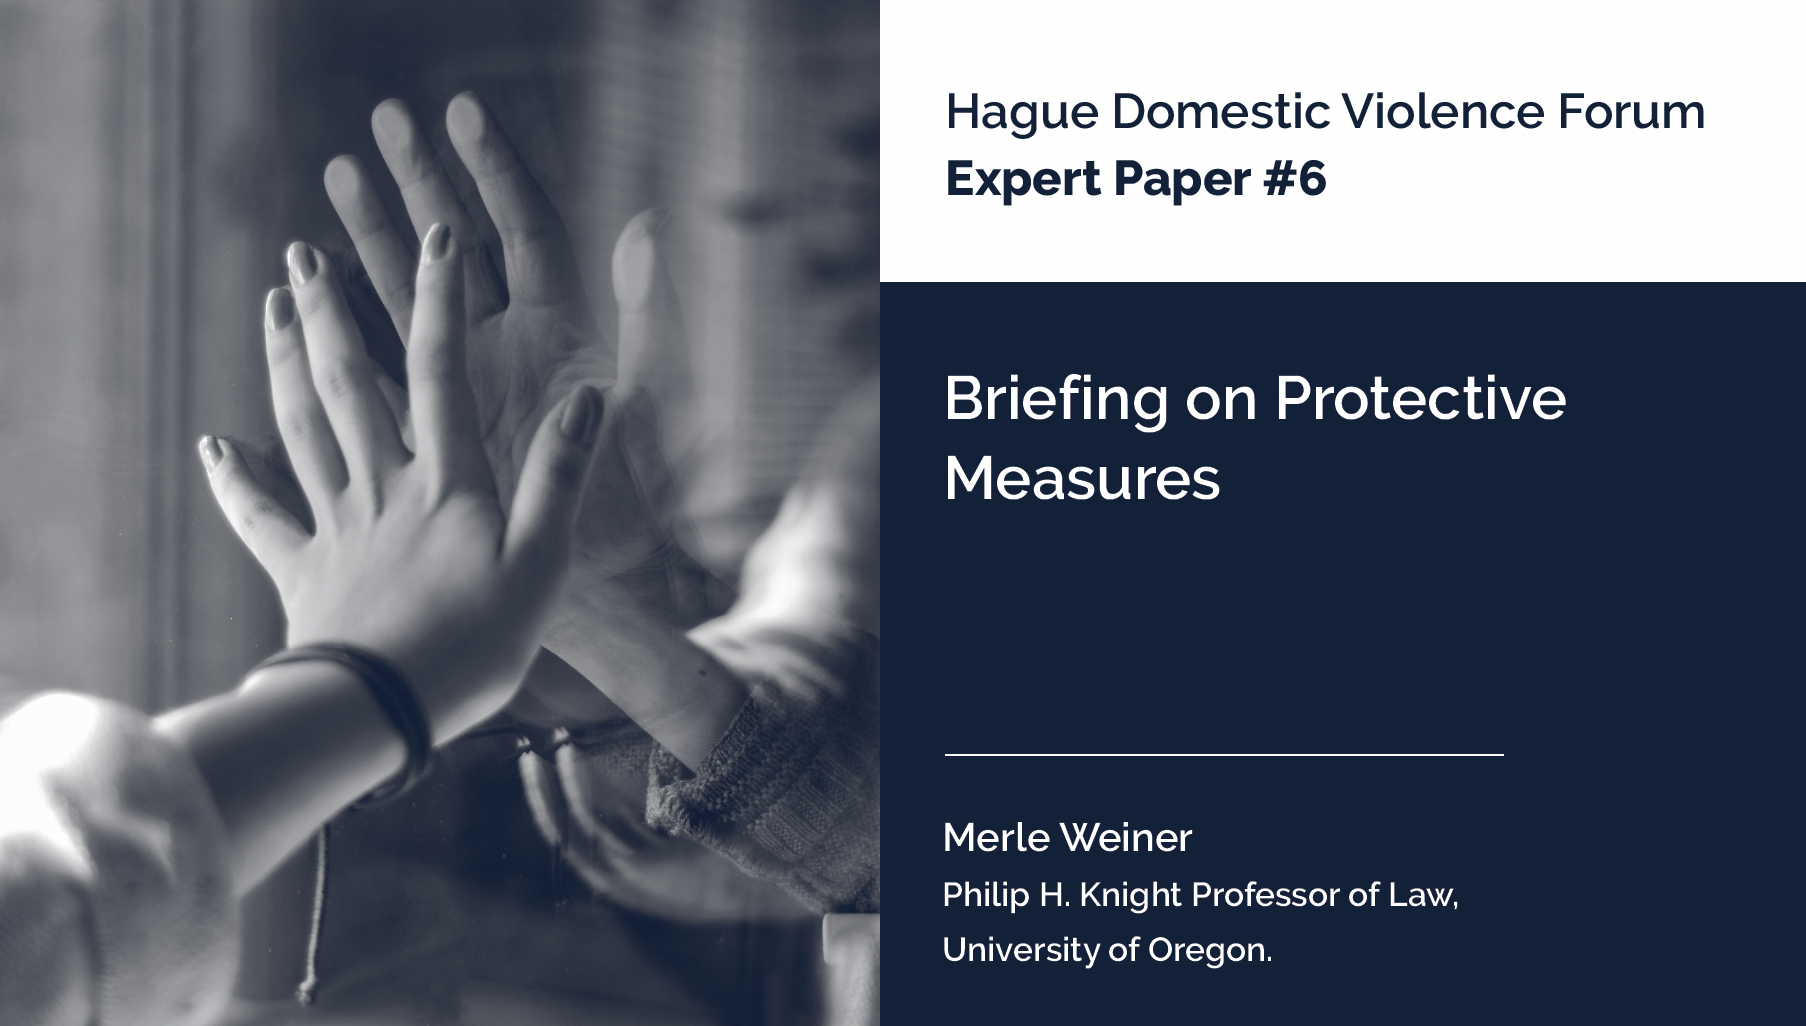 Expert Paper 6: Briefing on Protective Measures